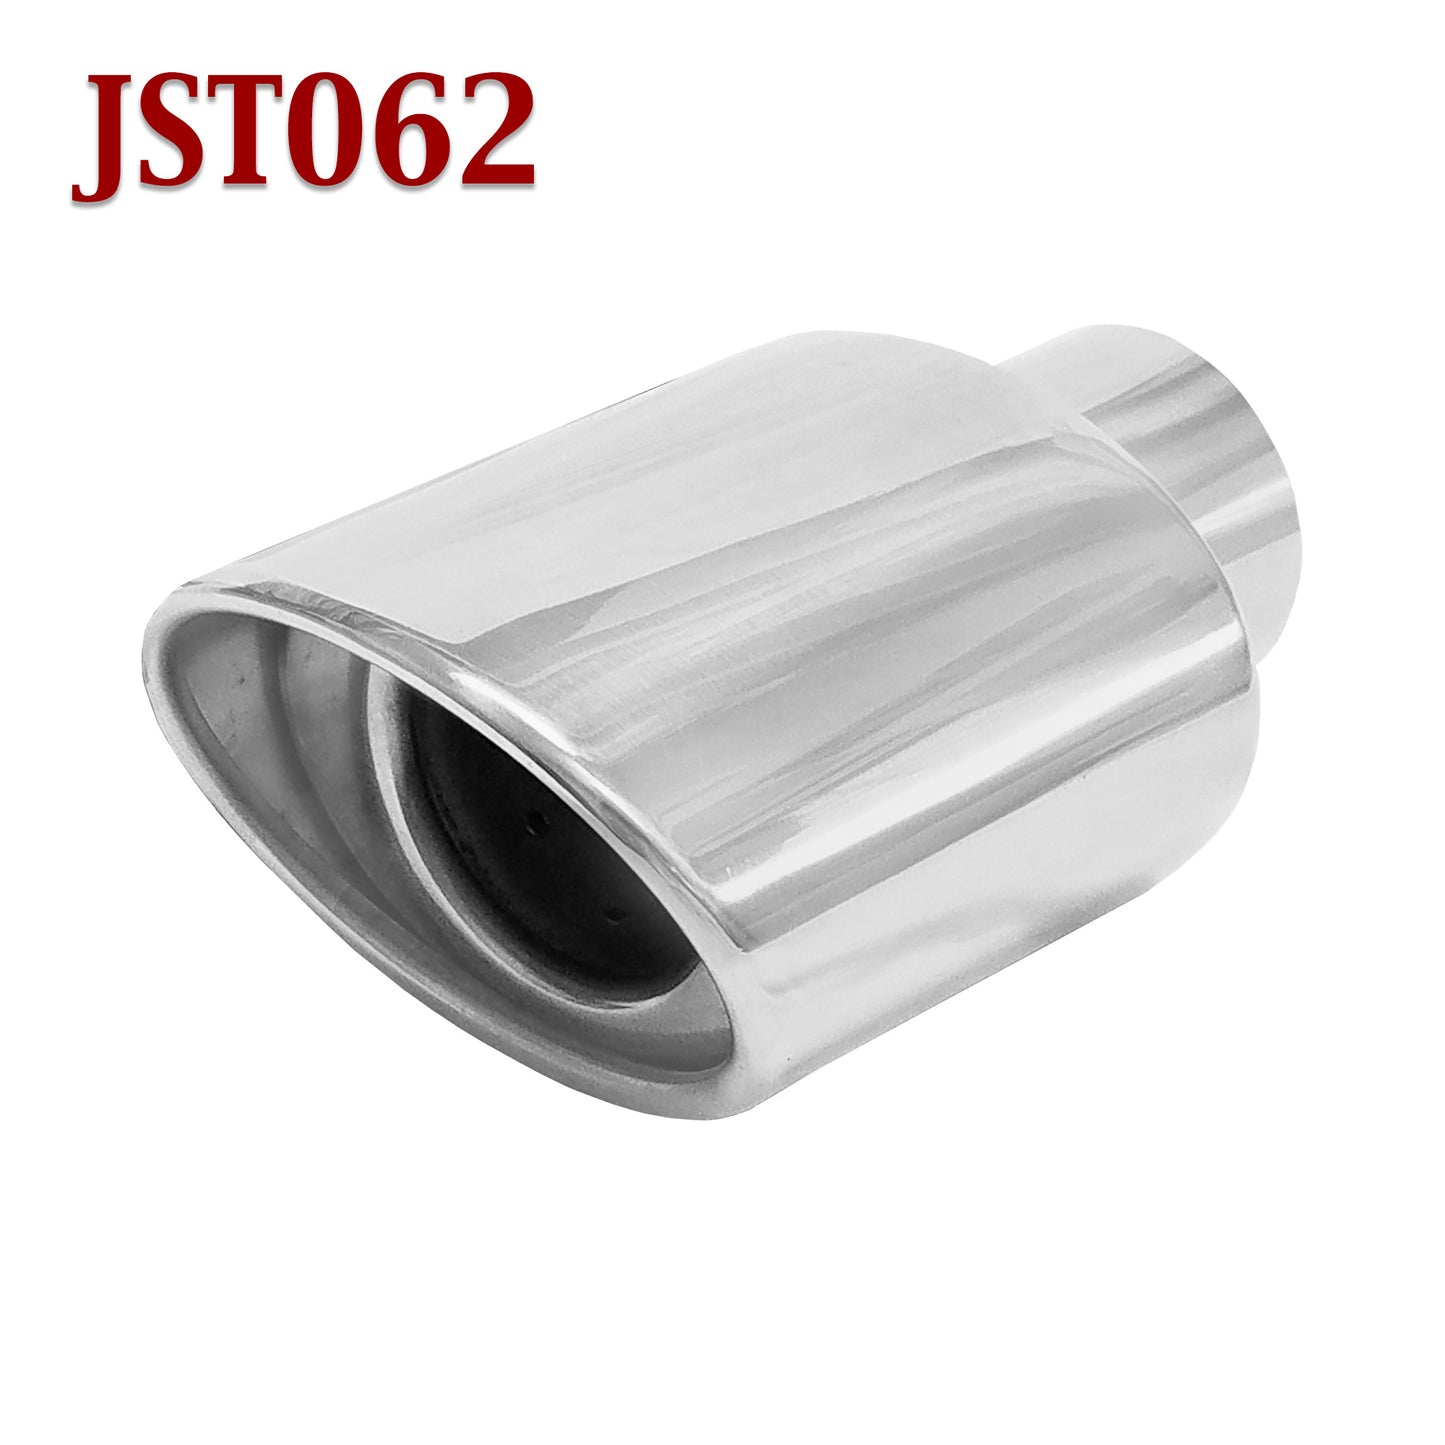 JST062 2.25" Stainless Oval Exhaust Tip 2 1/4" Inlet / 4 1/2" Outlet / 7" Long